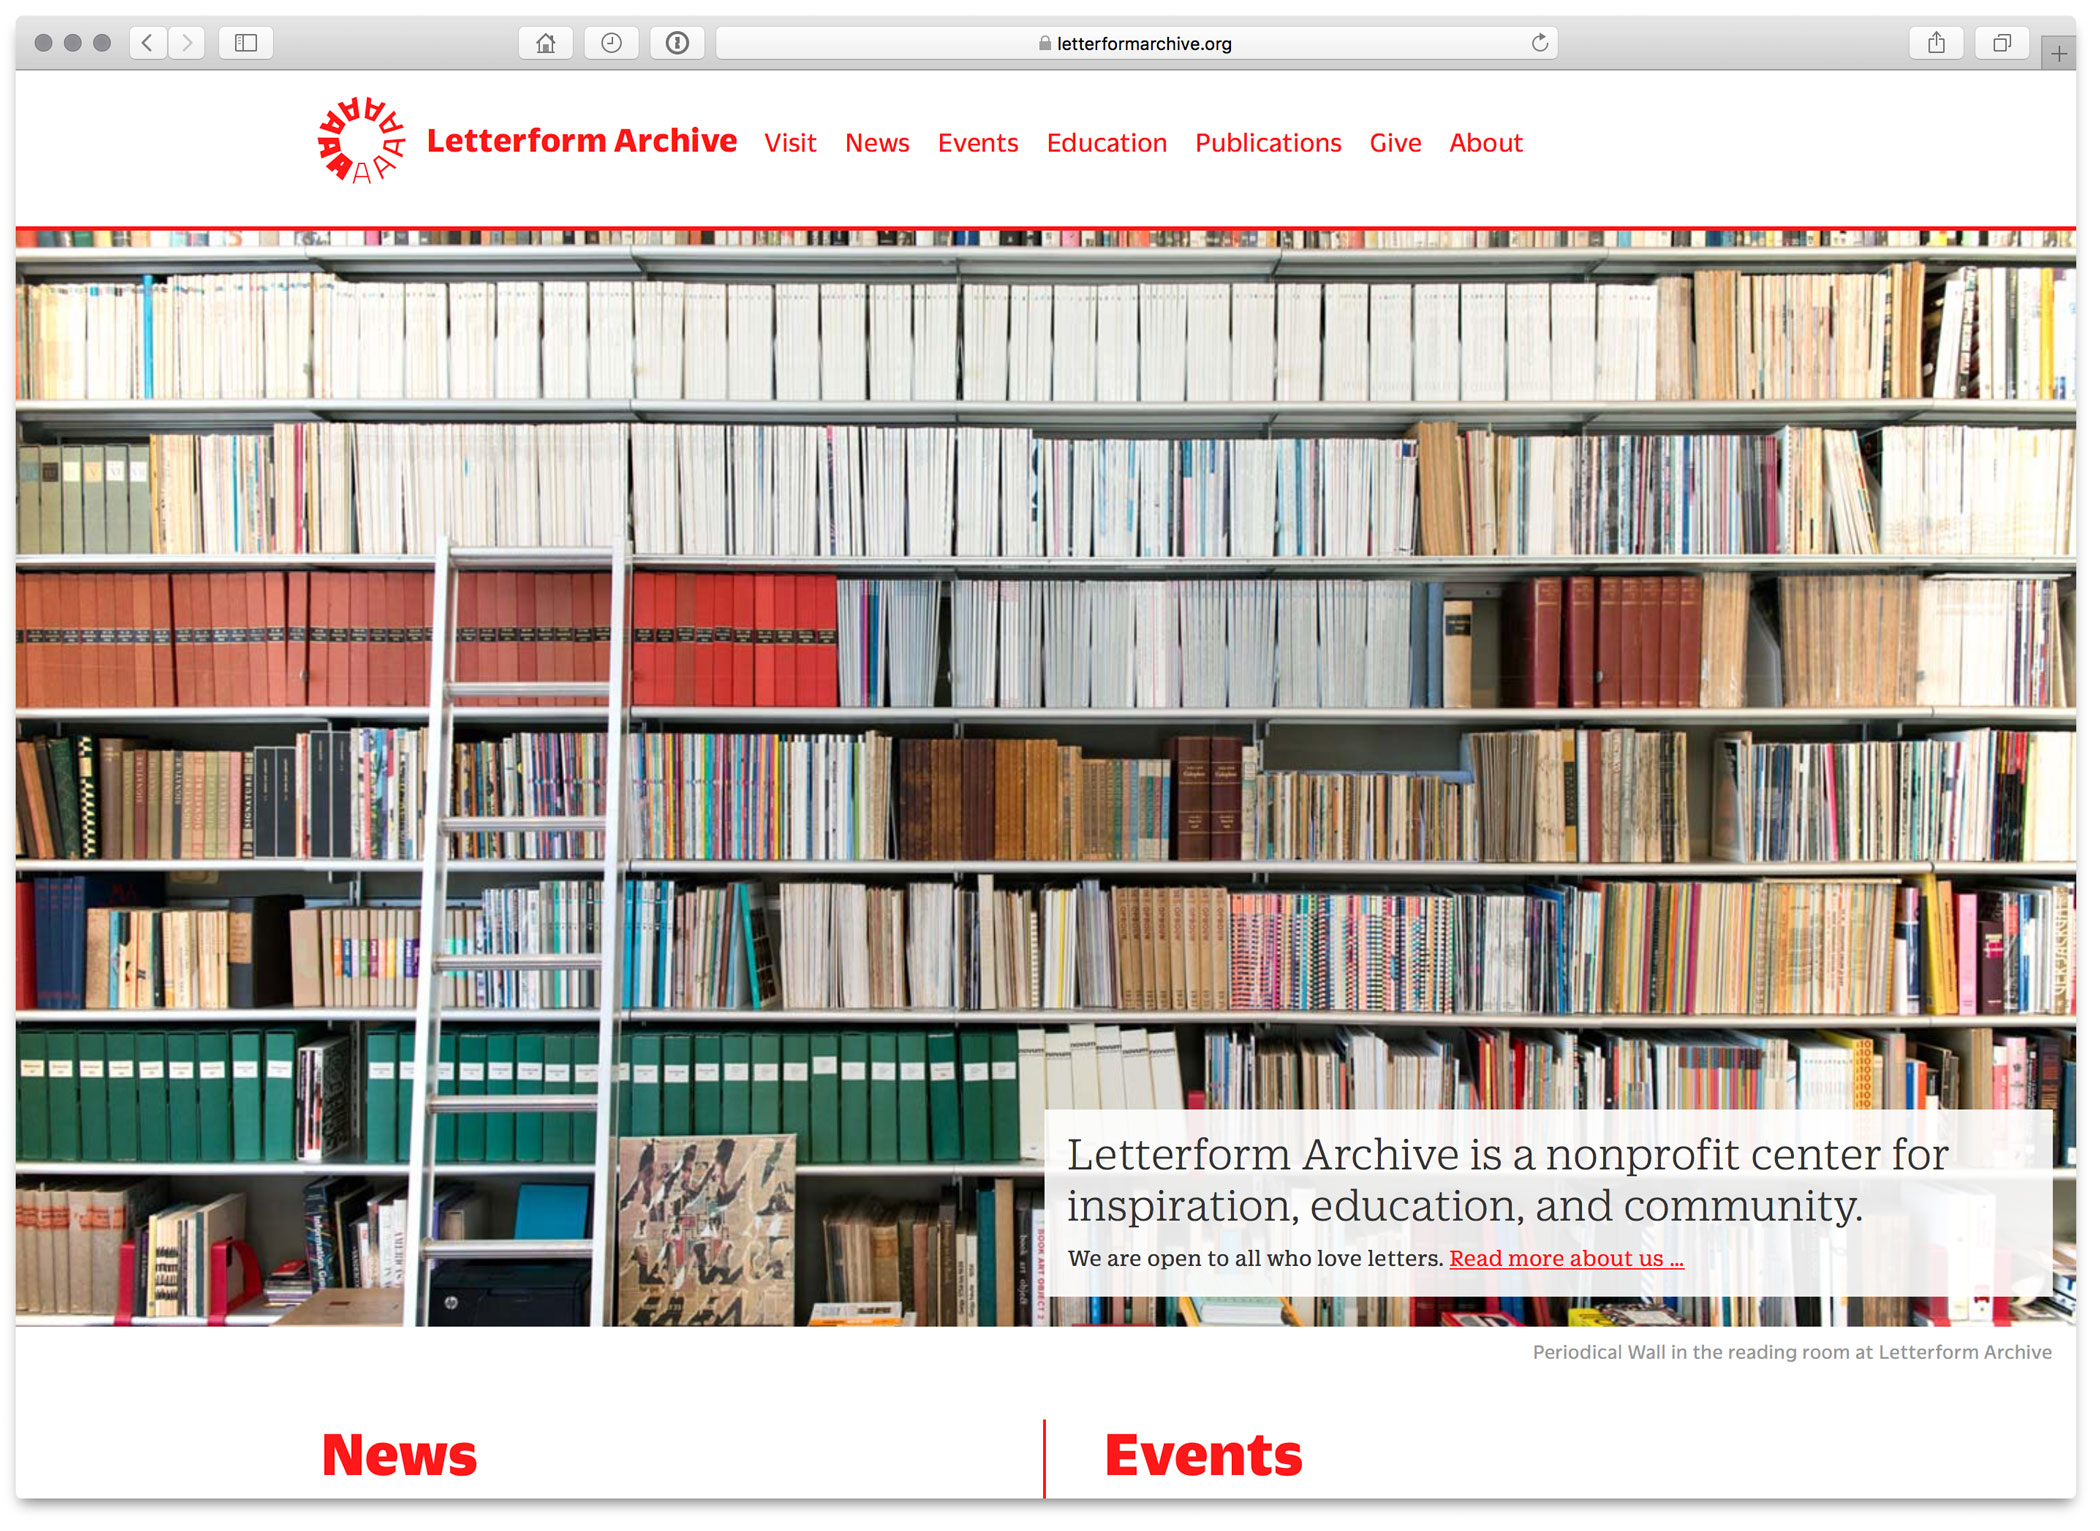 A screenshot of Letterform Archive’s website homepage in July 2017